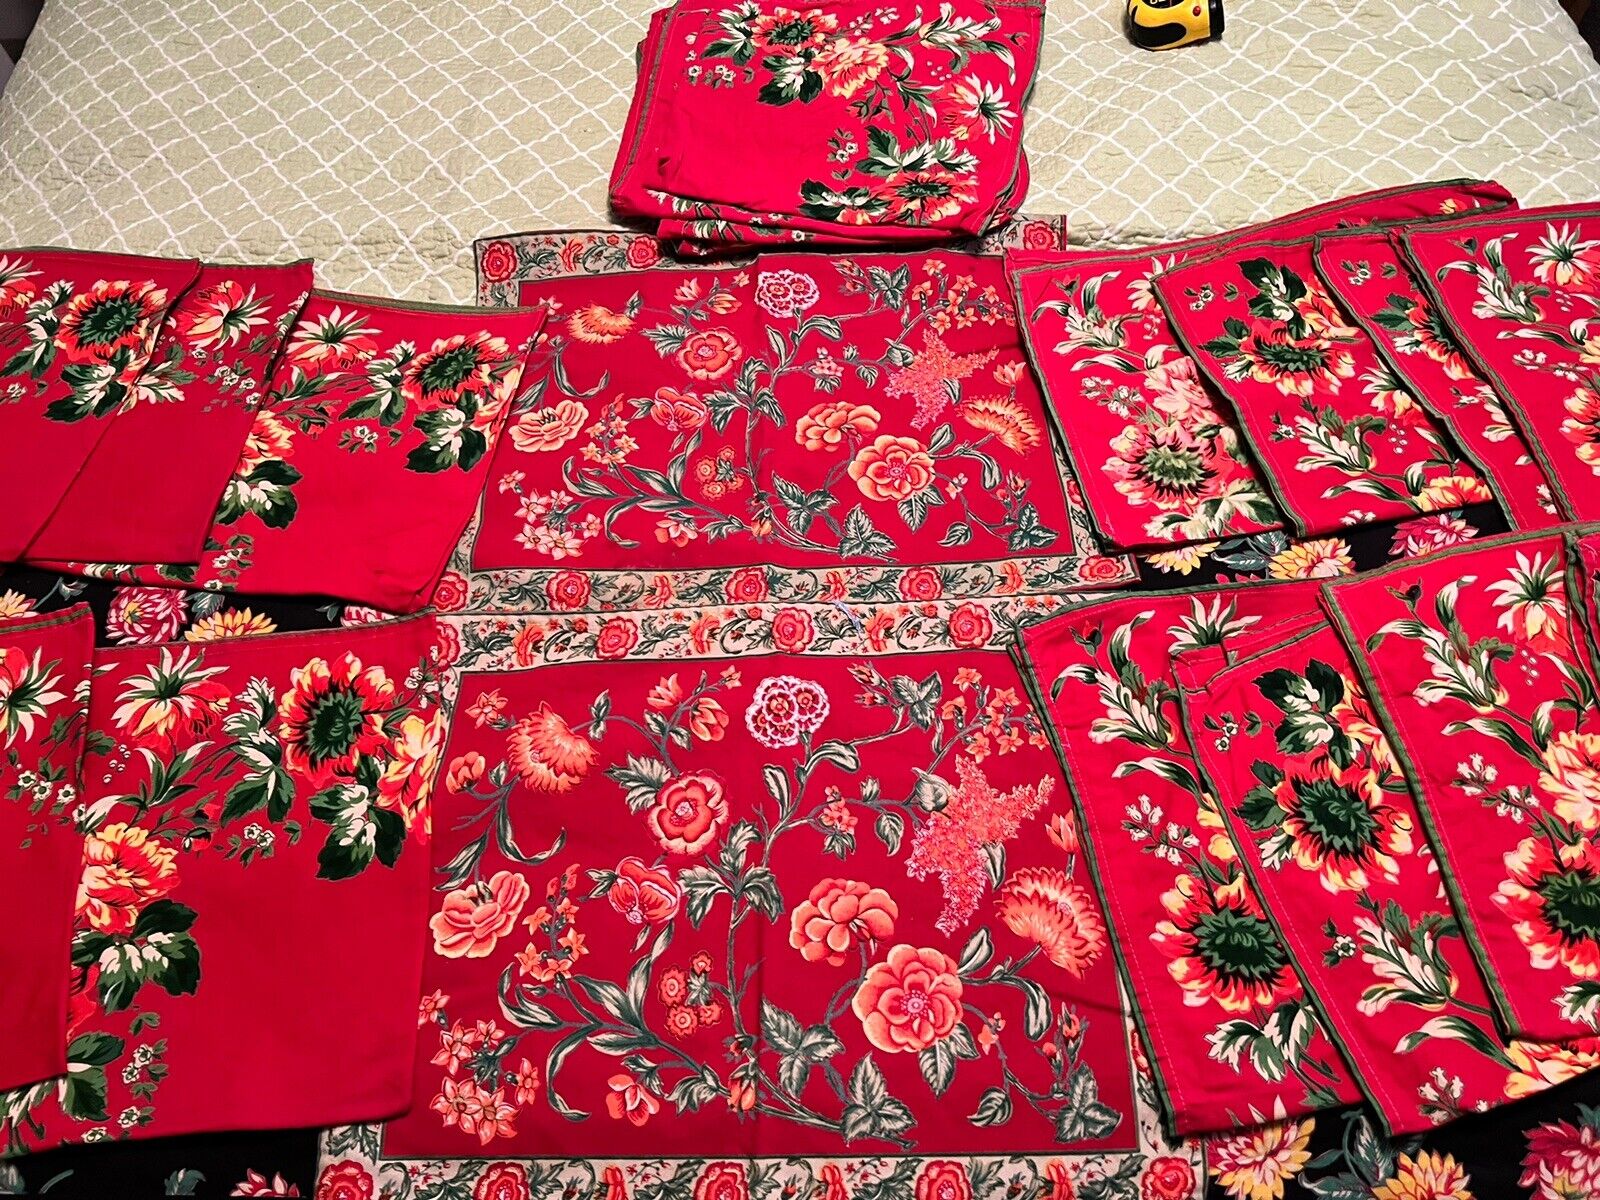 19 Beautiful Vintage Red Green Yellow Floral Napkins & 2 Placemats